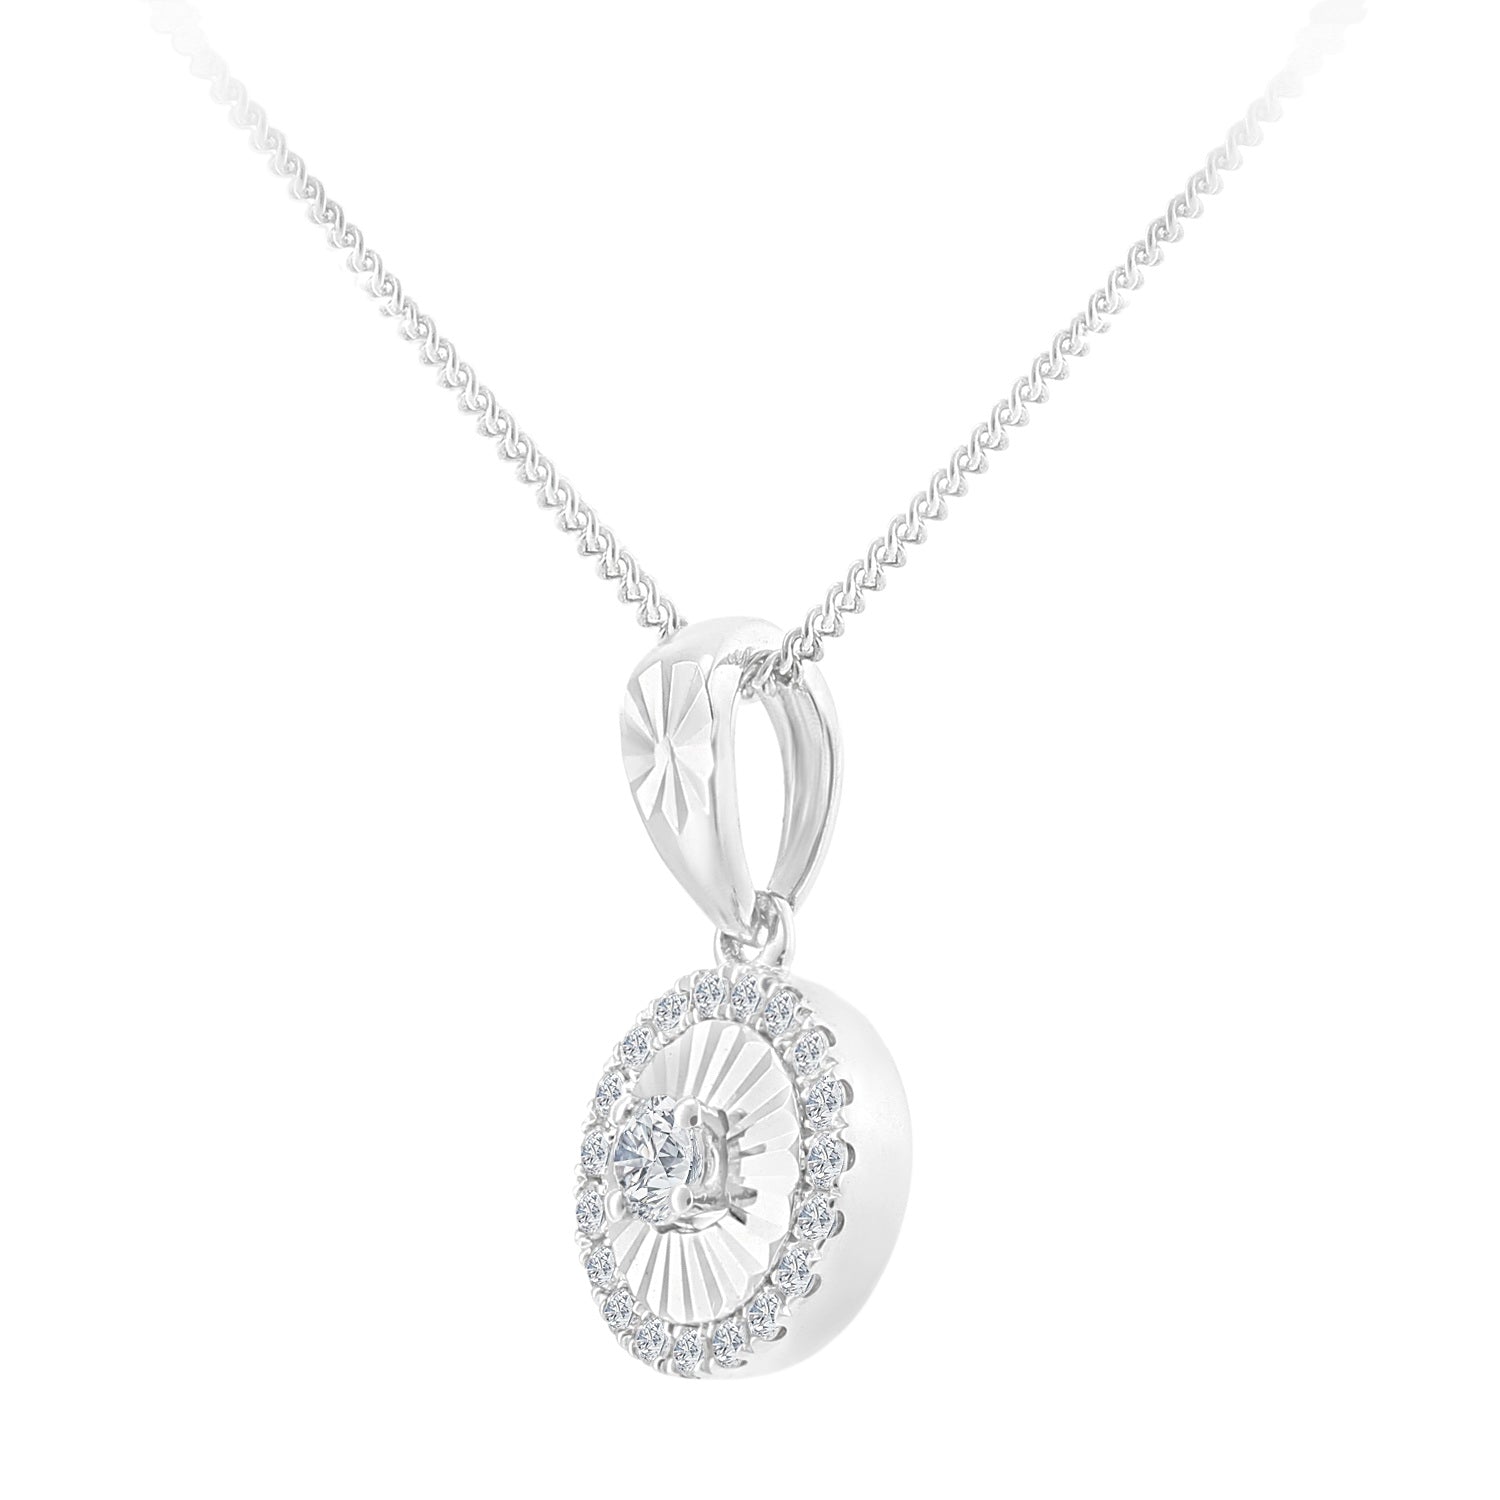 18ct White Gold  5pts Diamond 7pts Halo Pendant Necklace 18 inch - PP2AXL0156W18